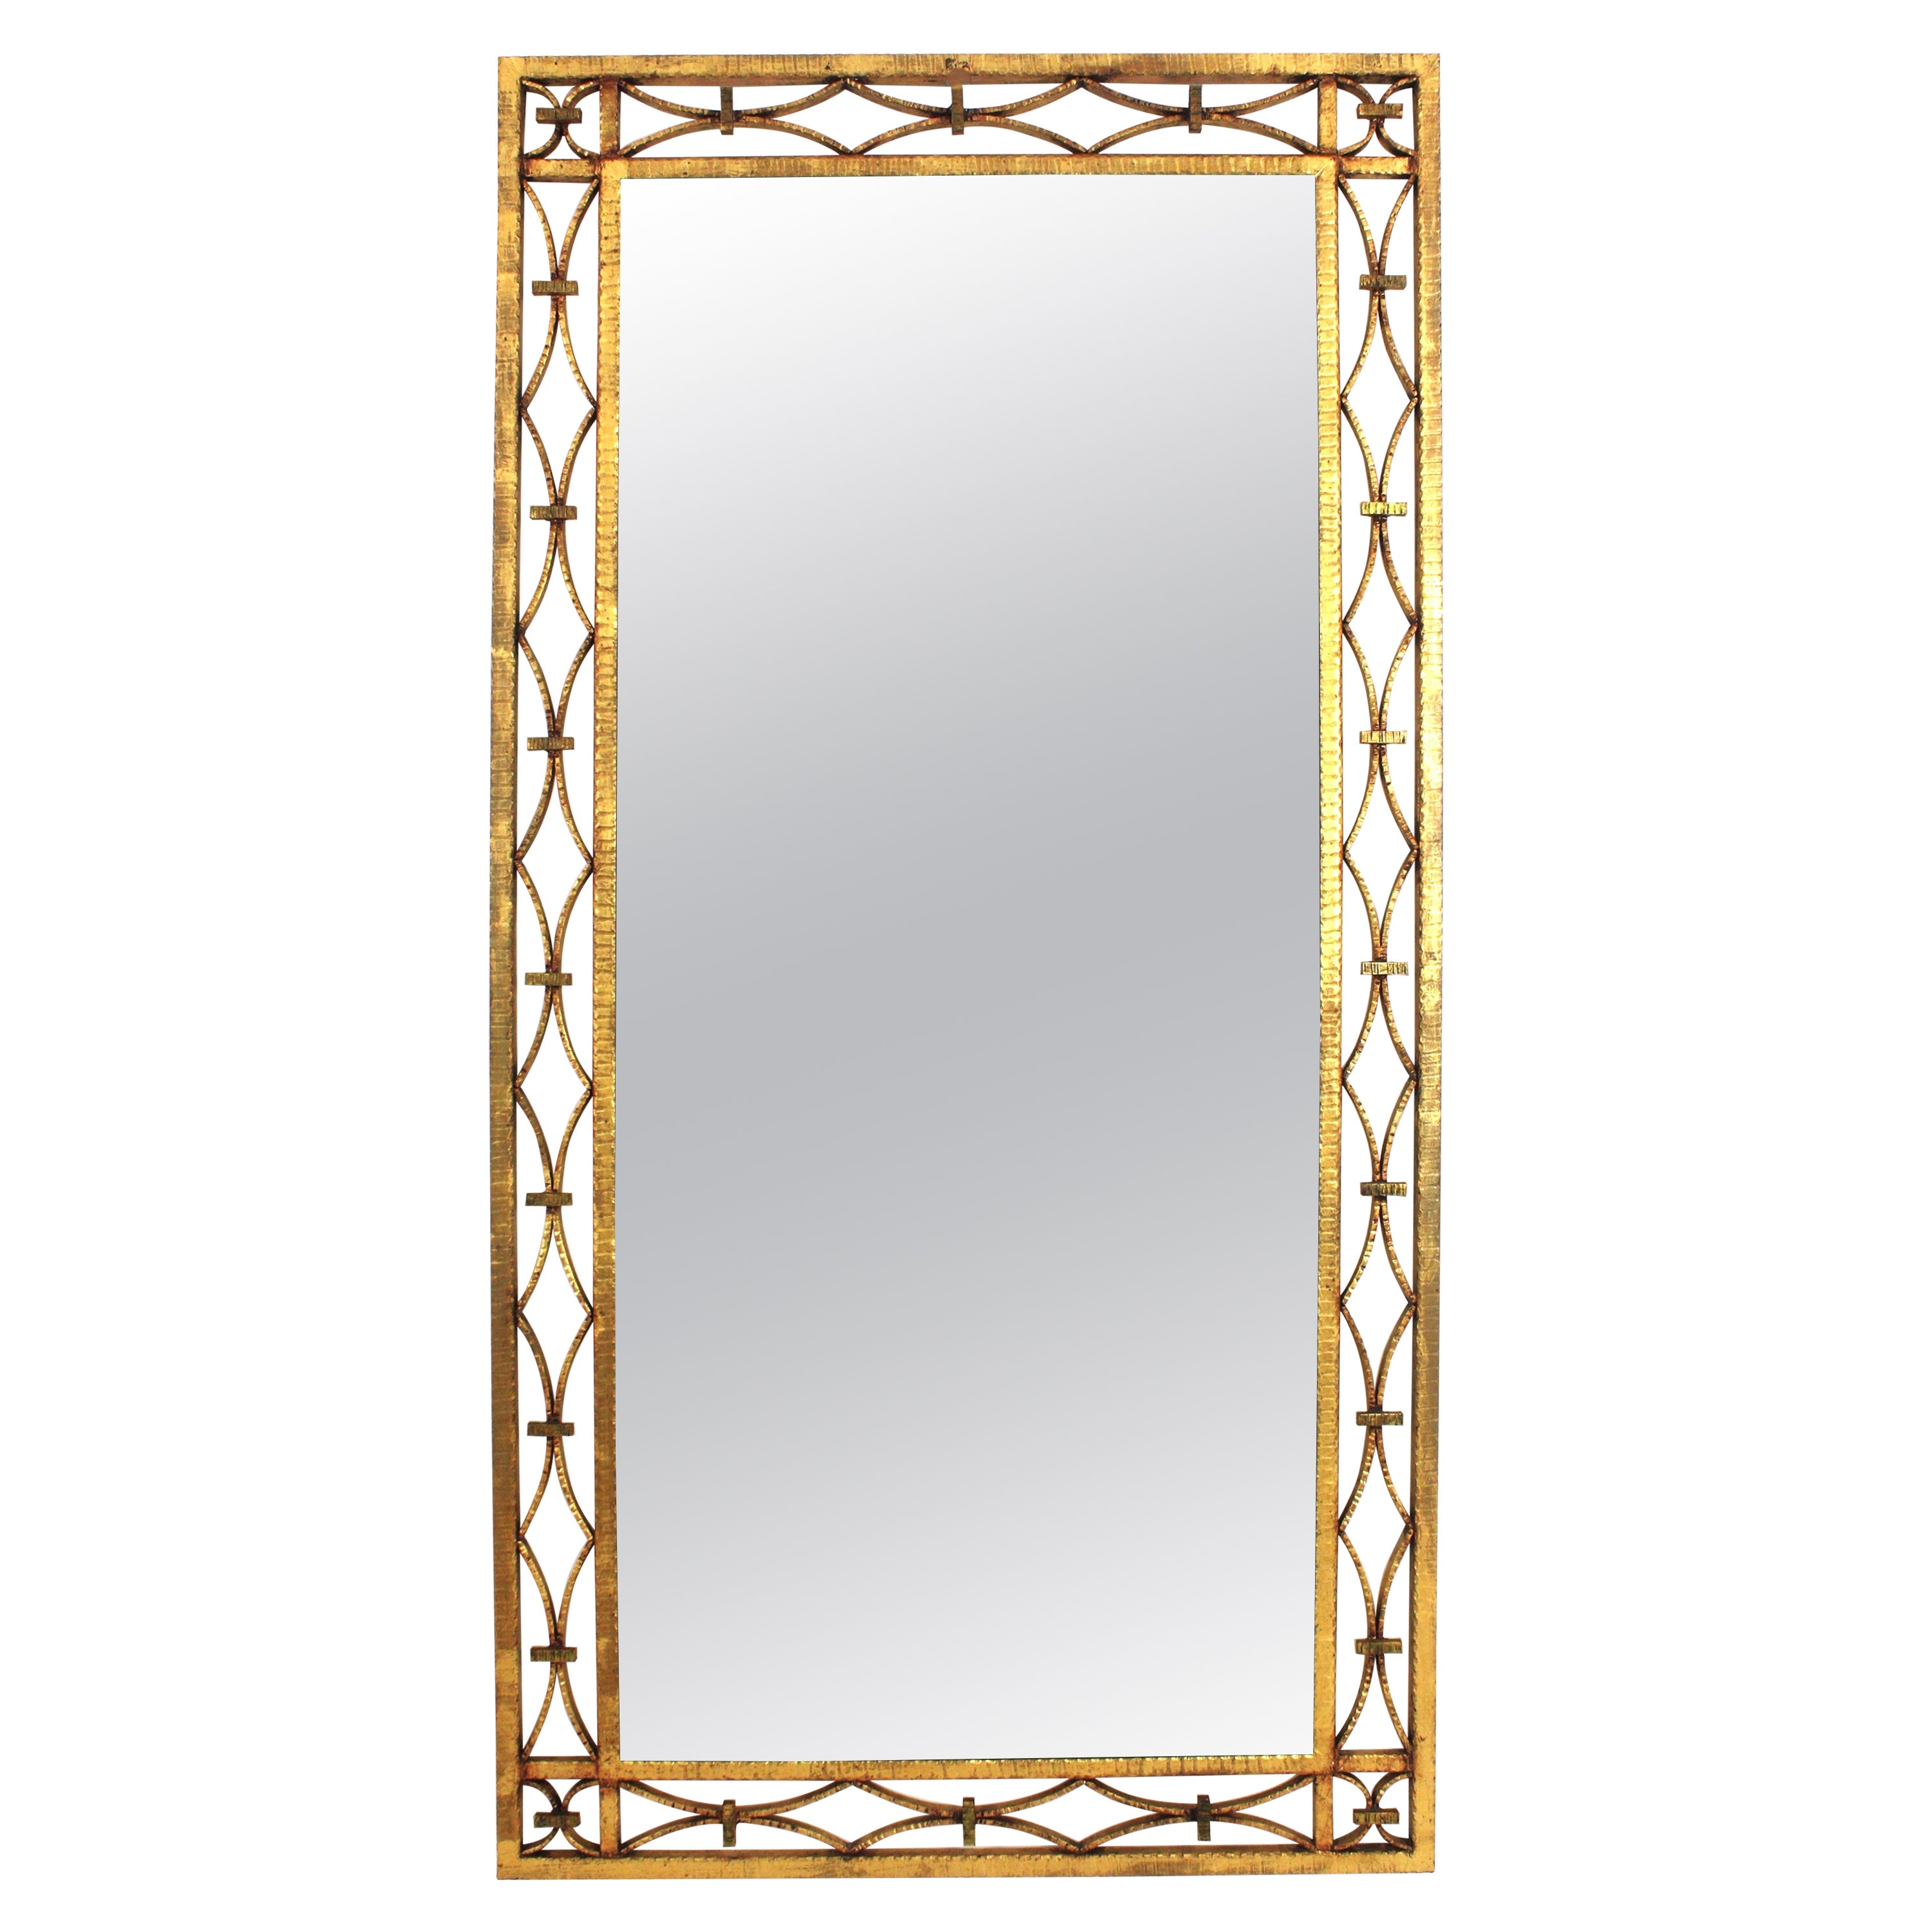 French Art Deco Rectangular Mirror in Gilded Wrought Iron 